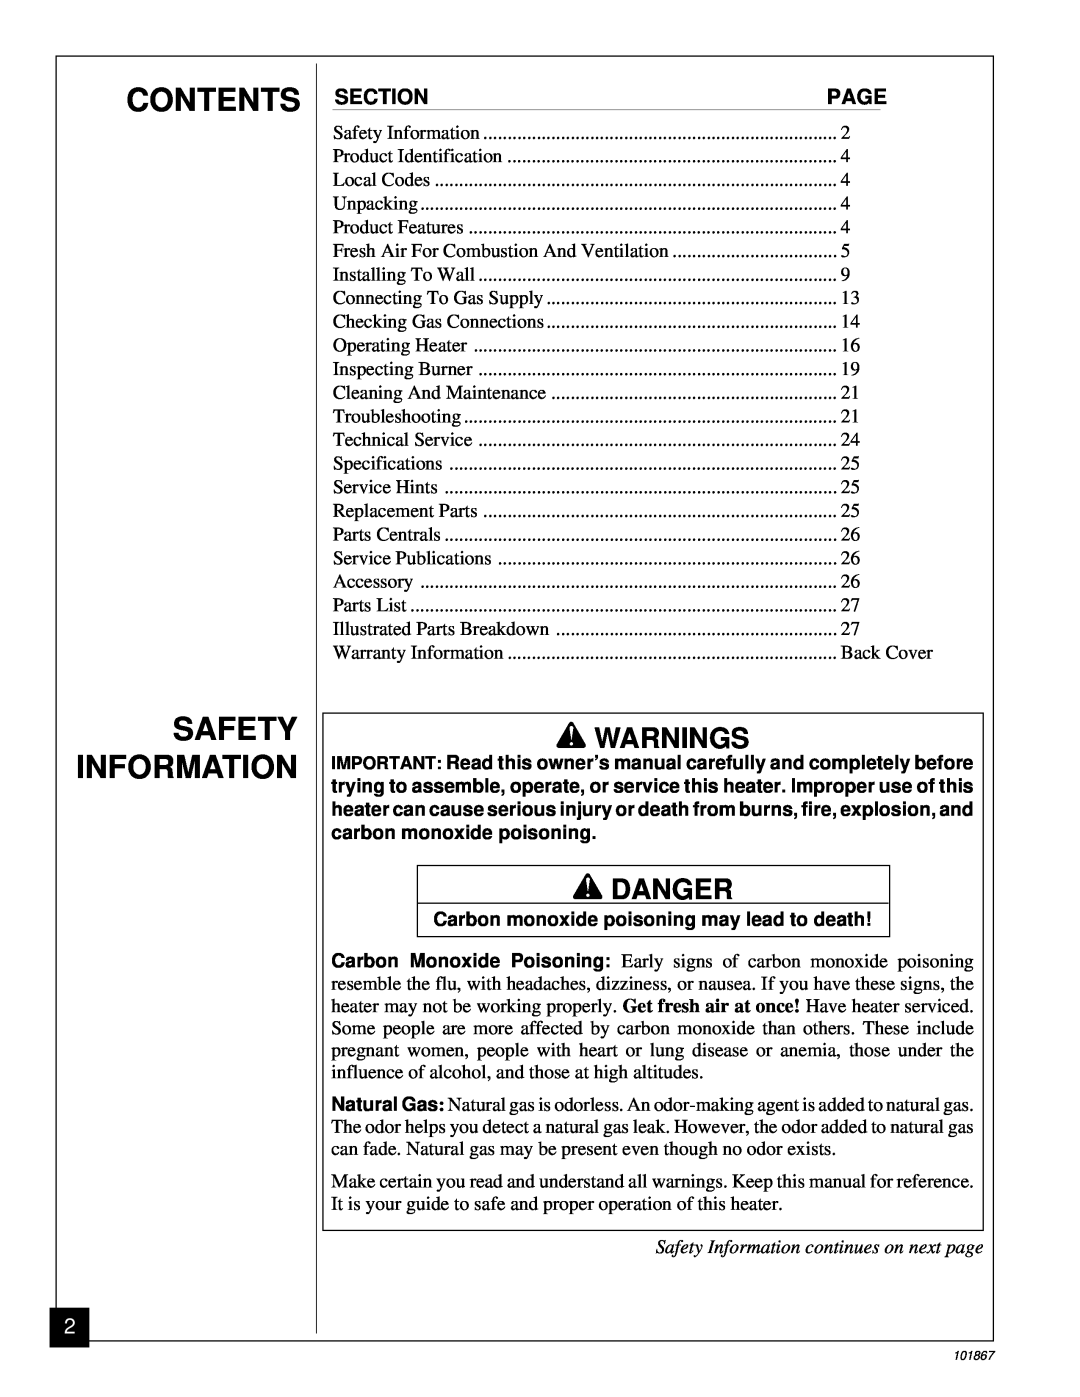 Desa CGN10R installation manual Contents Safety Information, Warnings, Danger, Safety Information continues on next page 